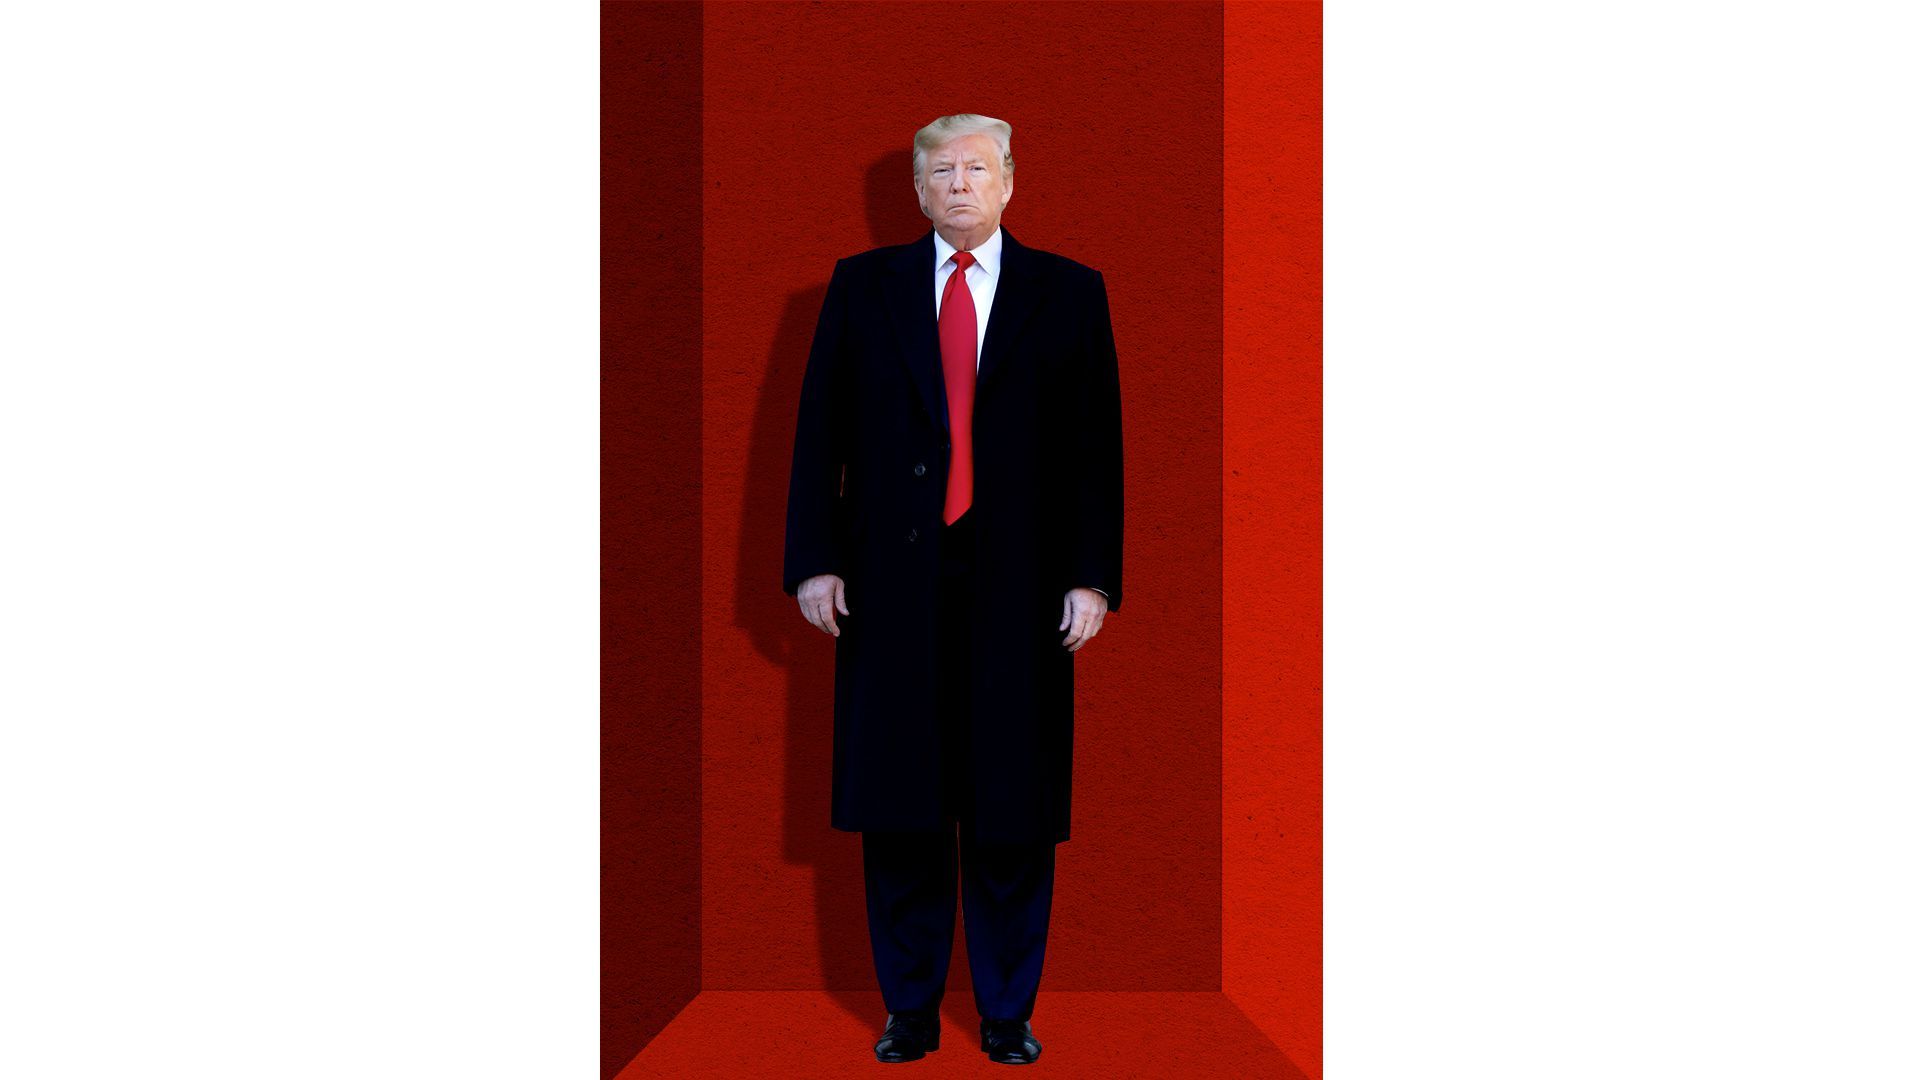 Photo illustration of the sides of an image closing in on Trump like walls.